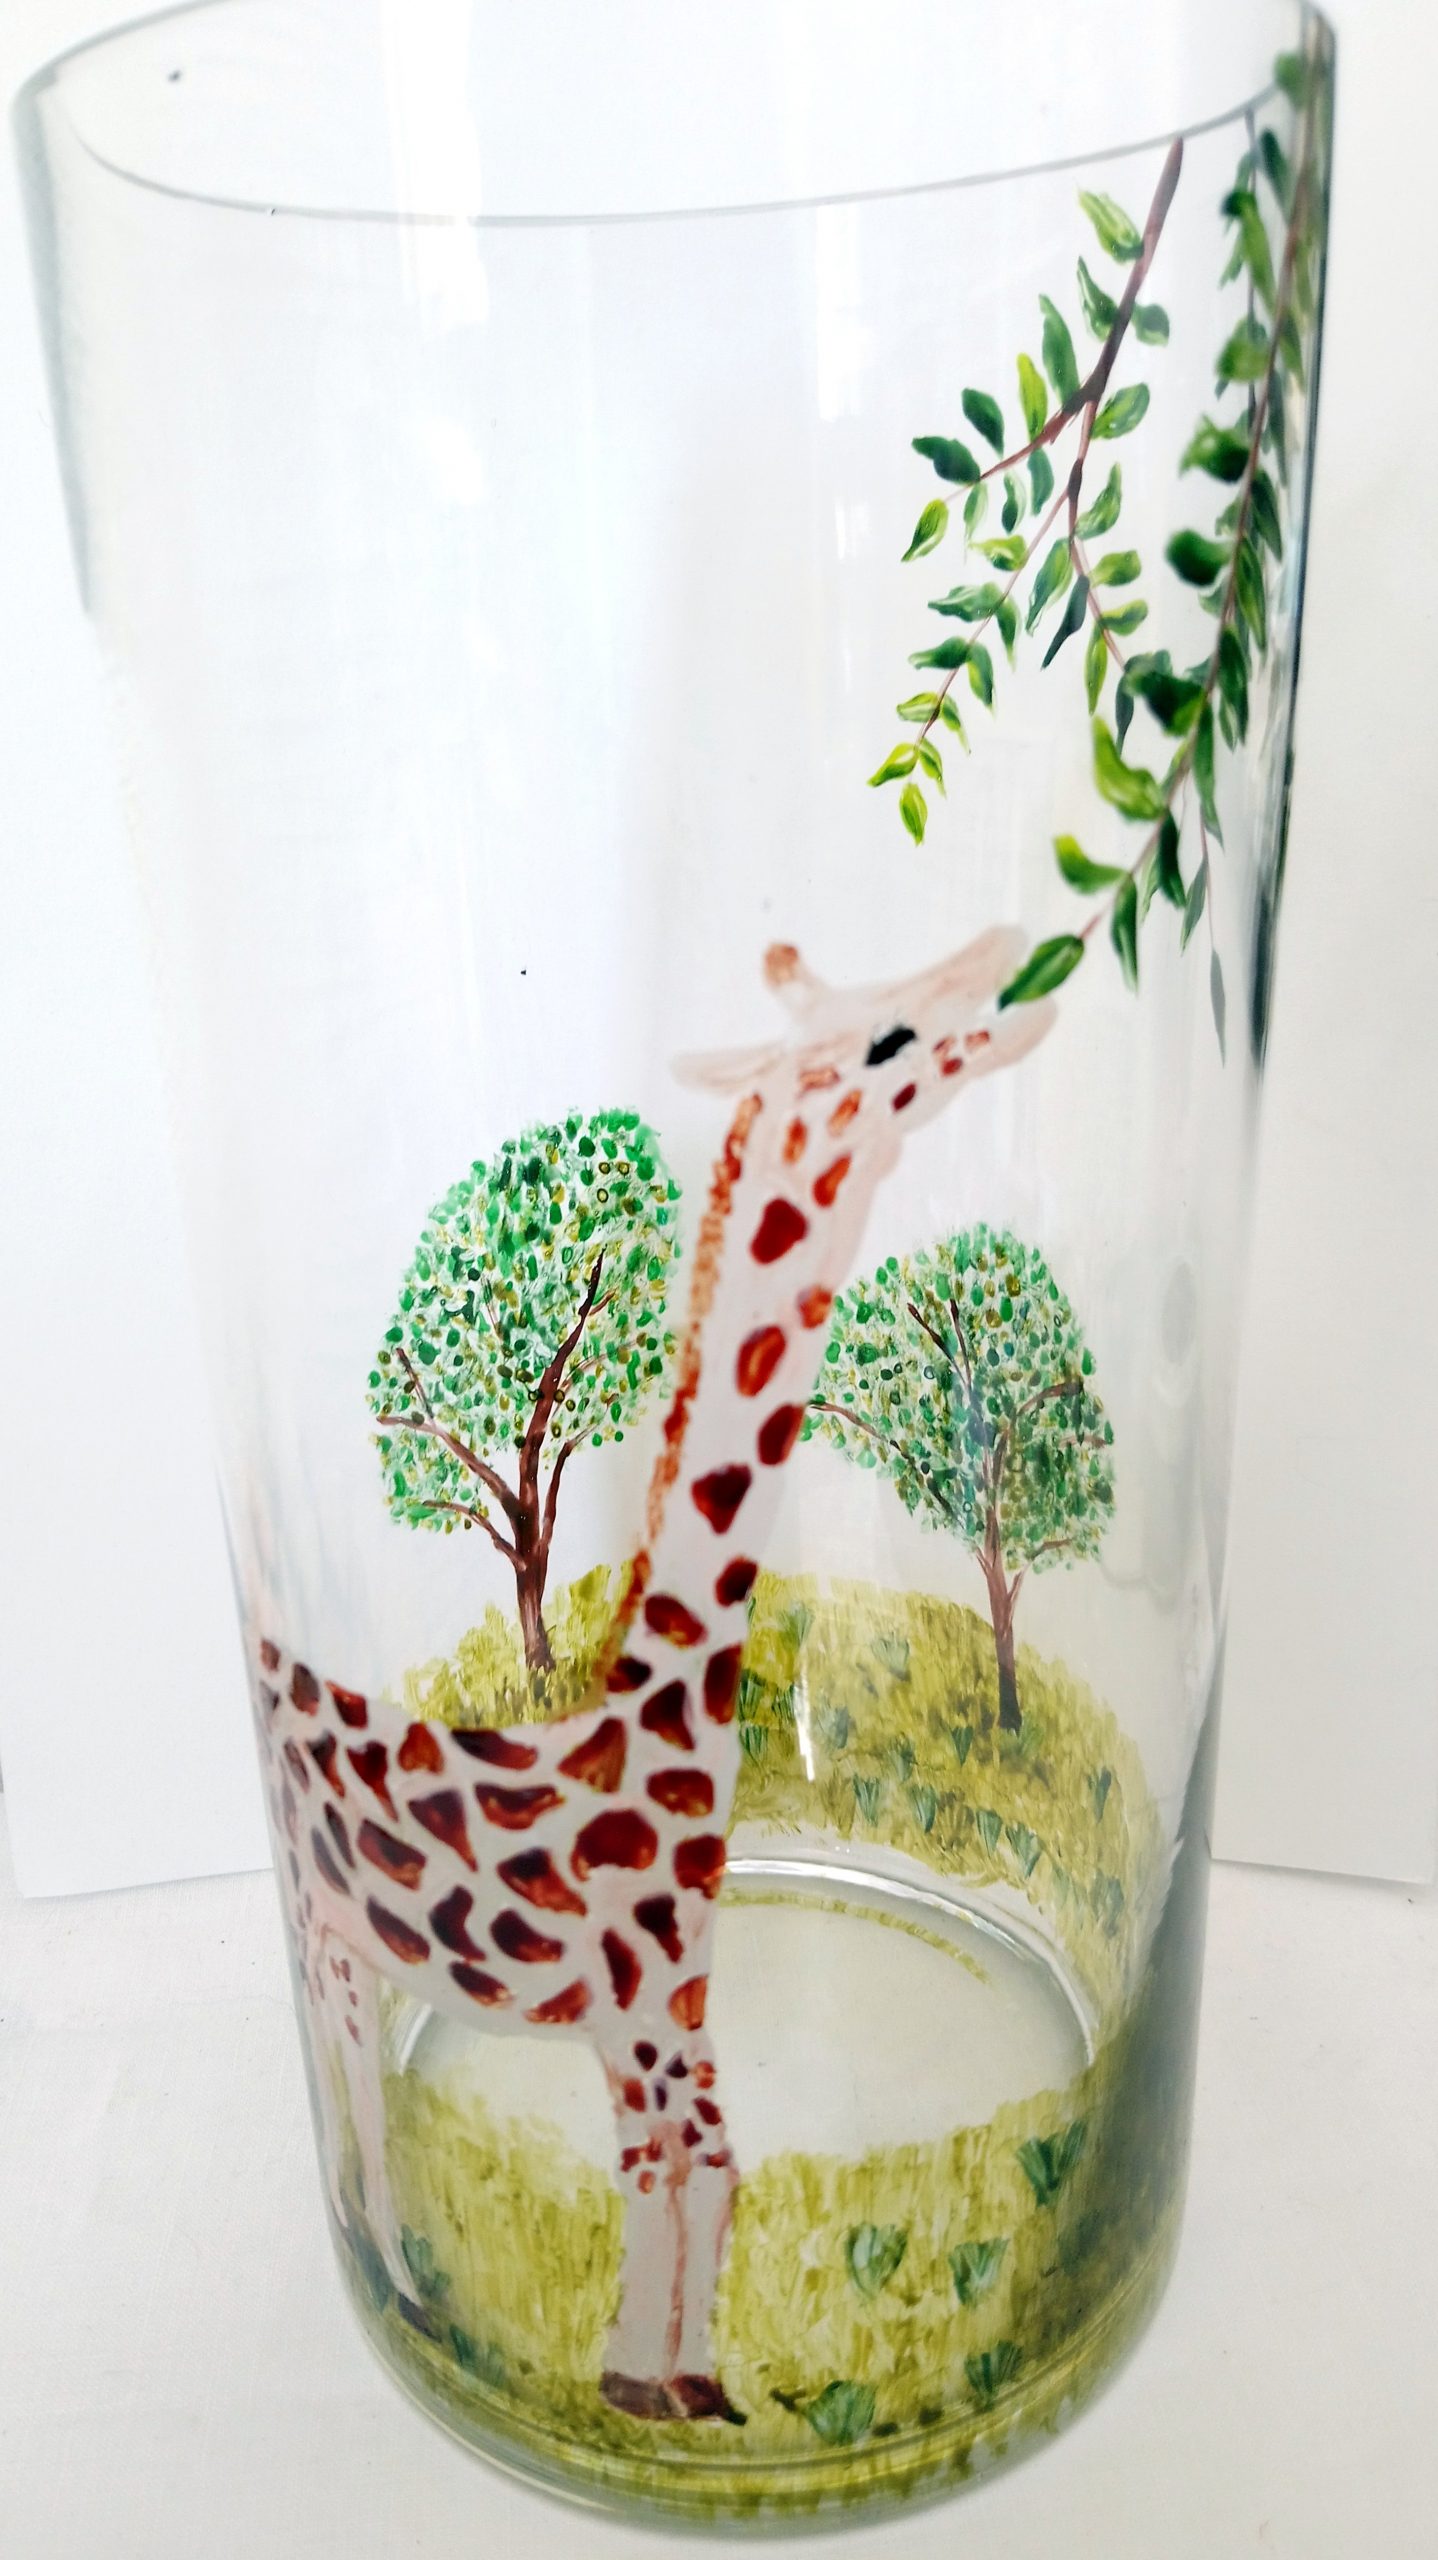 A Giraffe vase gift hand painted with a giraffe reaching up to leaves on a tree